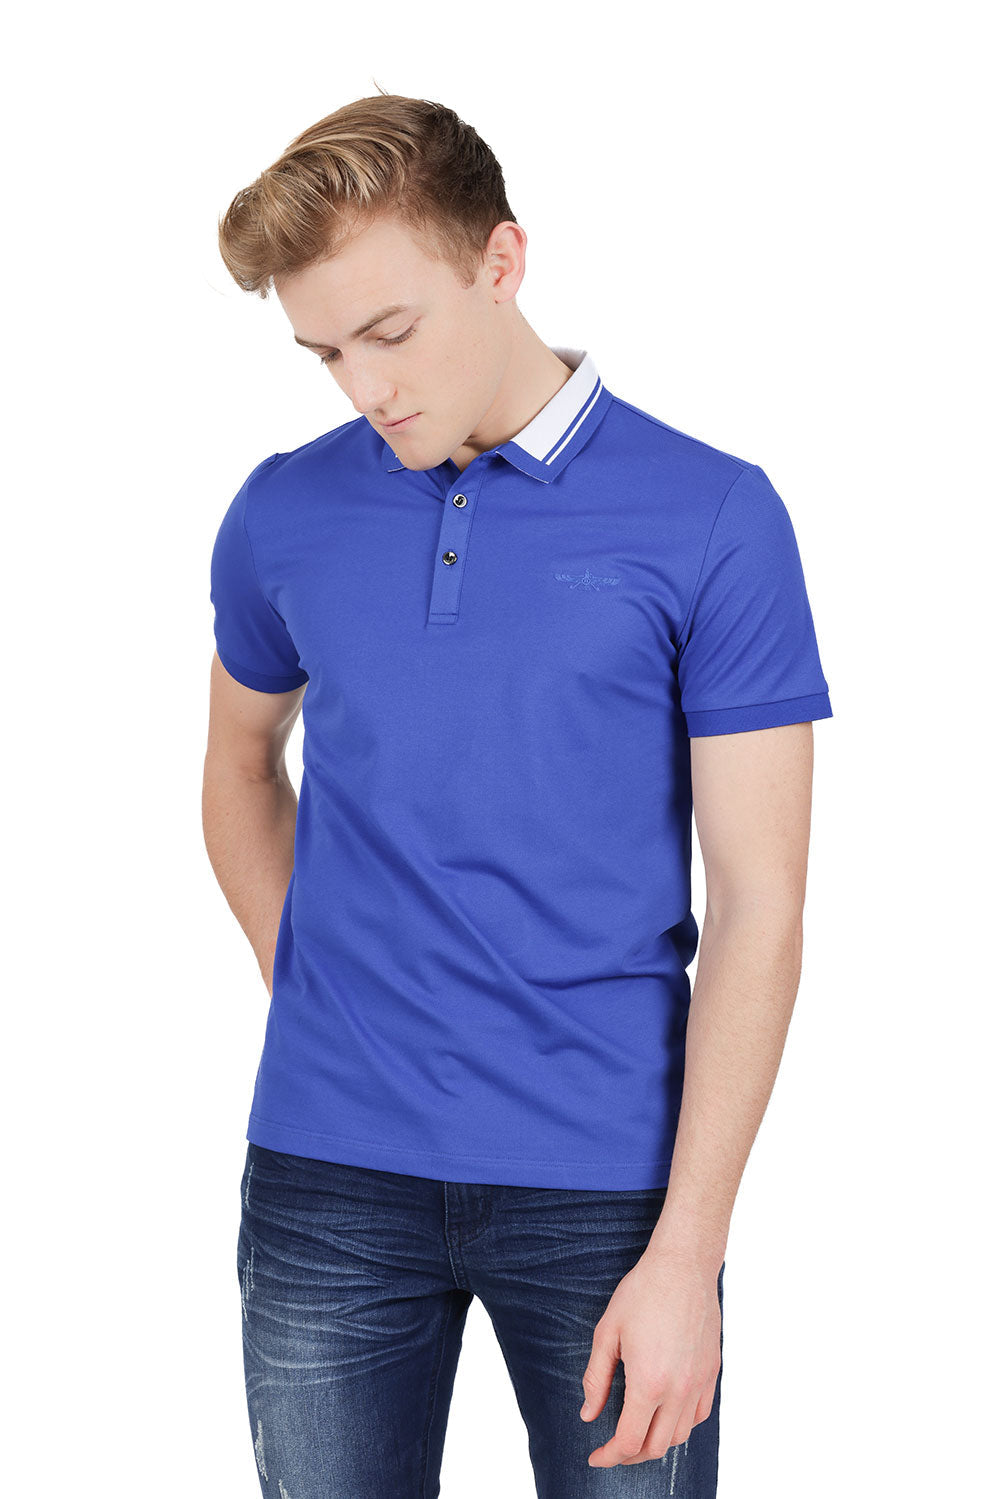 Barabas Men's Solid Color Luxury Short Sleeves Polo Shirts PP824 Royal